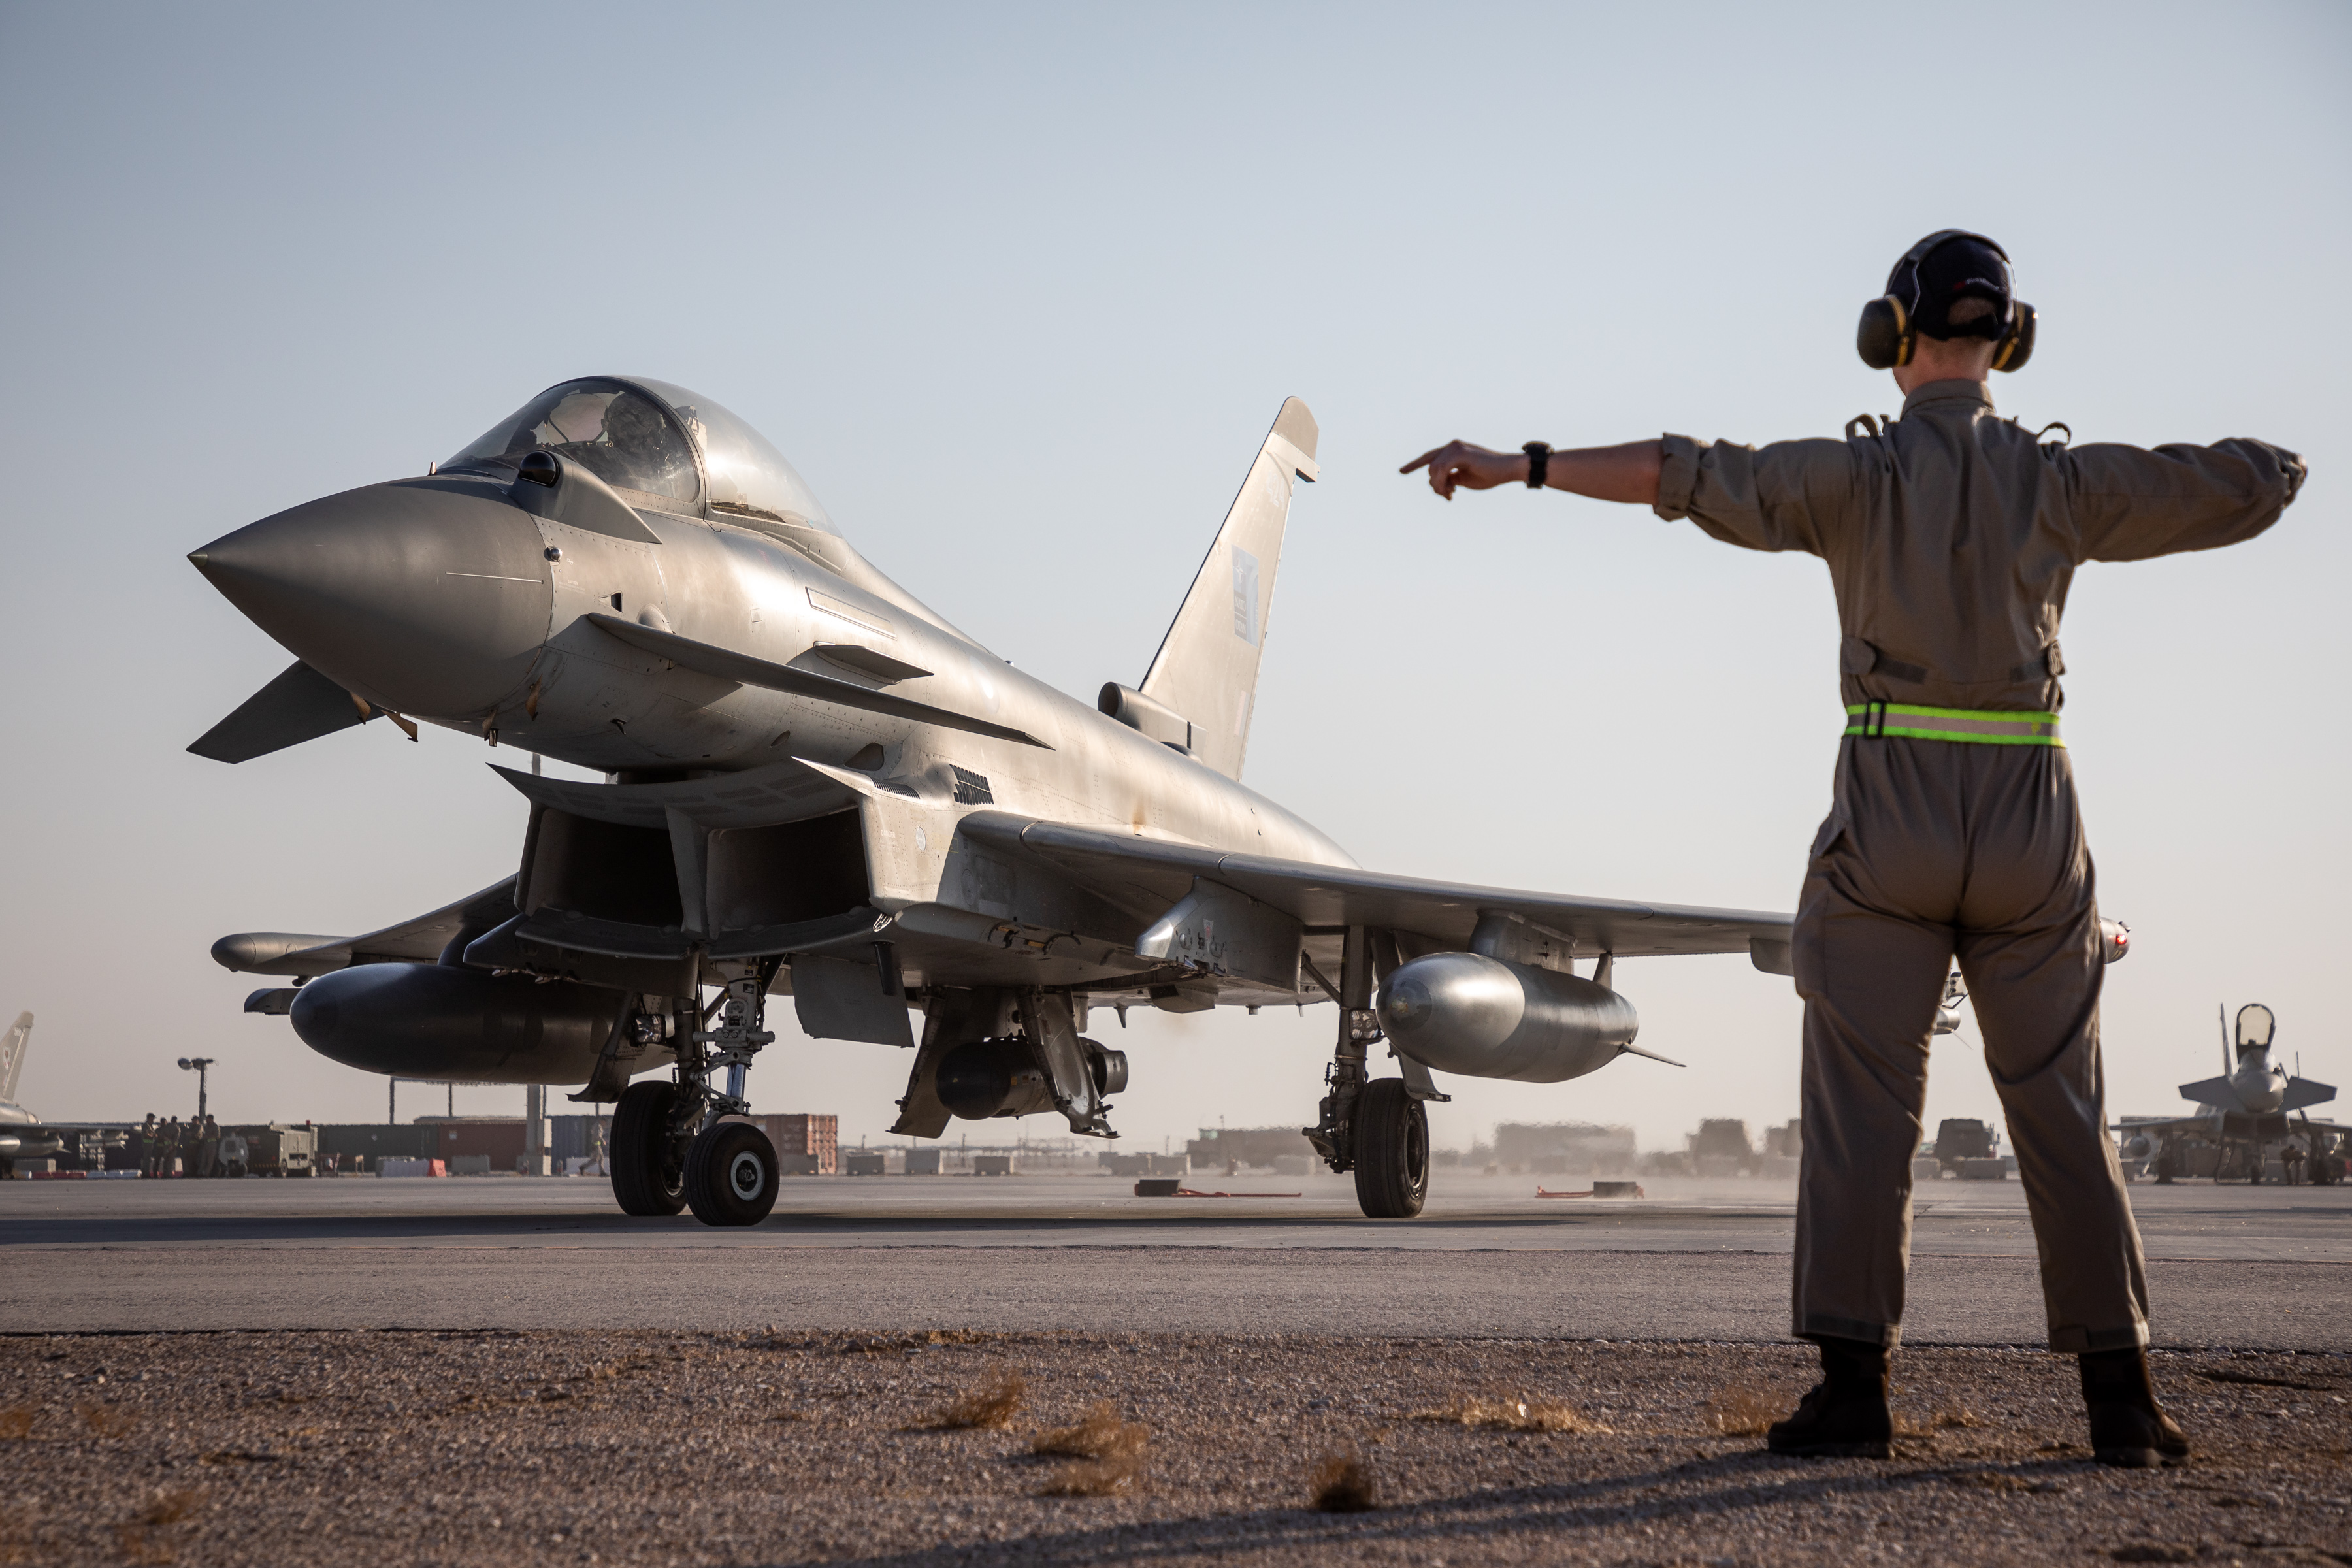 Personnel directs Typhoon on the runway.